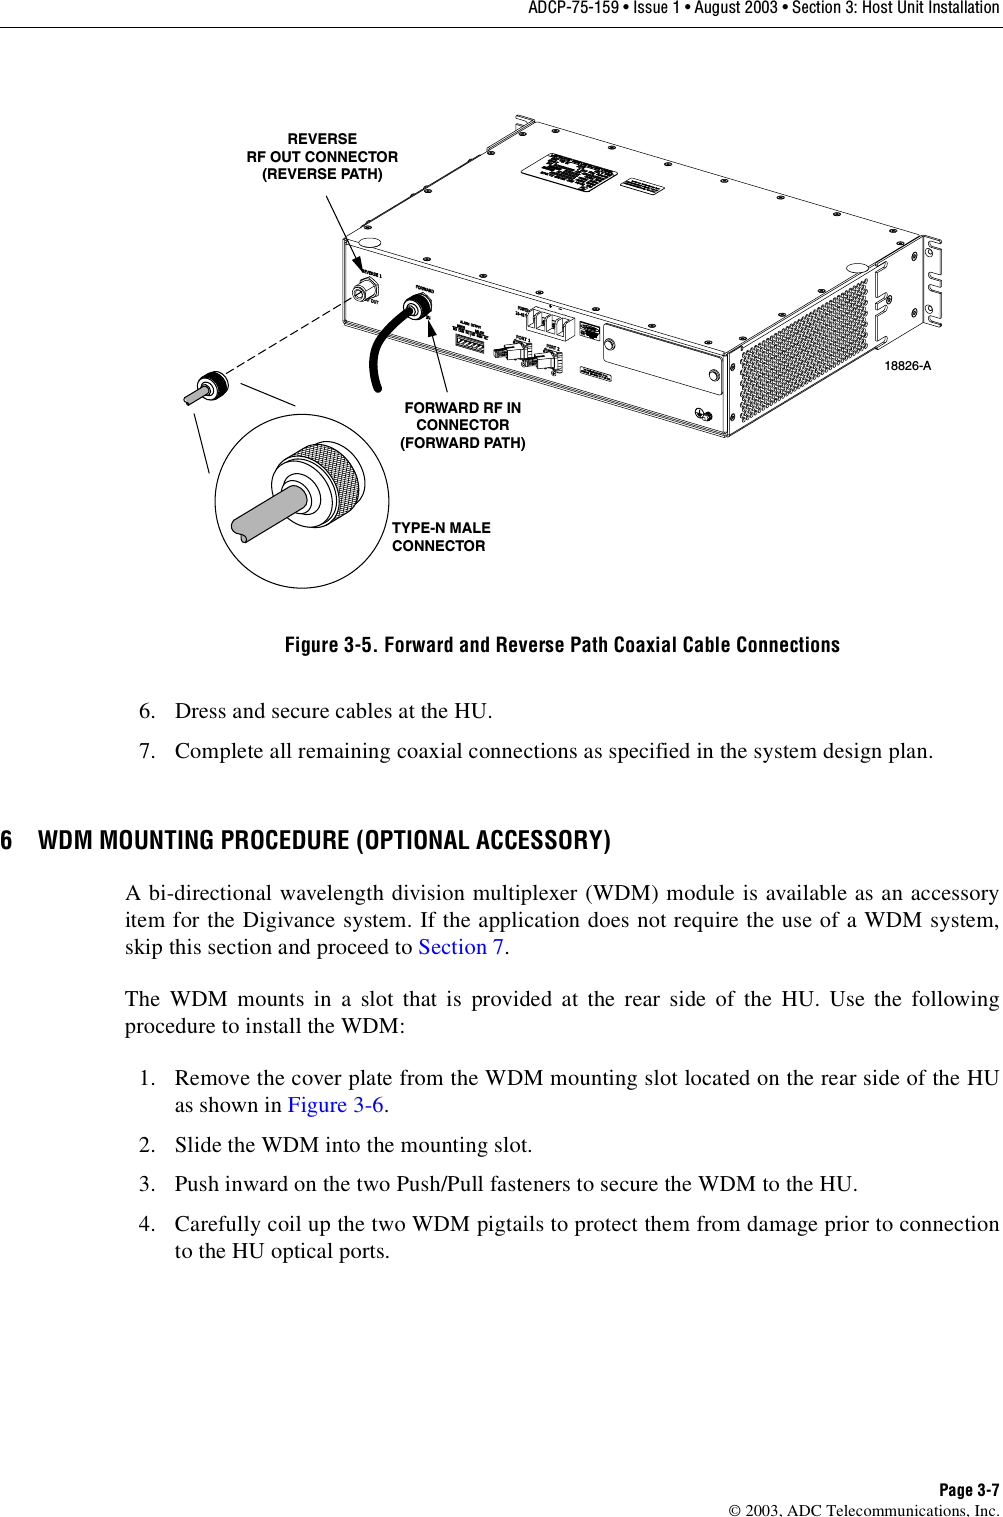 ADCP-75-159 • Issue 1 • August 2003 • Section 3: Host Unit InstallationPage 3-7© 2003, ADC Telecommunications, Inc.Figure 3-5. Forward and Reverse Path Coaxial Cable Connections6. Dress and secure cables at the HU. 7. Complete all remaining coaxial connections as specified in the system design plan. 6 WDM MOUNTING PROCEDURE (OPTIONAL ACCESSORY)A bi-directional wavelength division multiplexer (WDM) module is available as an accessoryitem for the Digivance system. If the application does not require the use of a WDM system,skip this section and proceed to Section 7. The WDM mounts in a slot that is provided at the rear side of the HU. Use the followingprocedure to install the WDM: 1. Remove the cover plate from the WDM mounting slot located on the rear side of the HUas shown in Figure 3-6. 2. Slide the WDM into the mounting slot. 3. Push inward on the two Push/Pull fasteners to secure the WDM to the HU. 4. Carefully coil up the two WDM pigtails to protect them from damage prior to connectionto the HU optical ports. 18826-ATYPE-N MALECONNECTORREVERSERF OUT CONNECTOR(REVERSE PATH)FORWARD RF INCONNECTOR(FORWARD PATH)